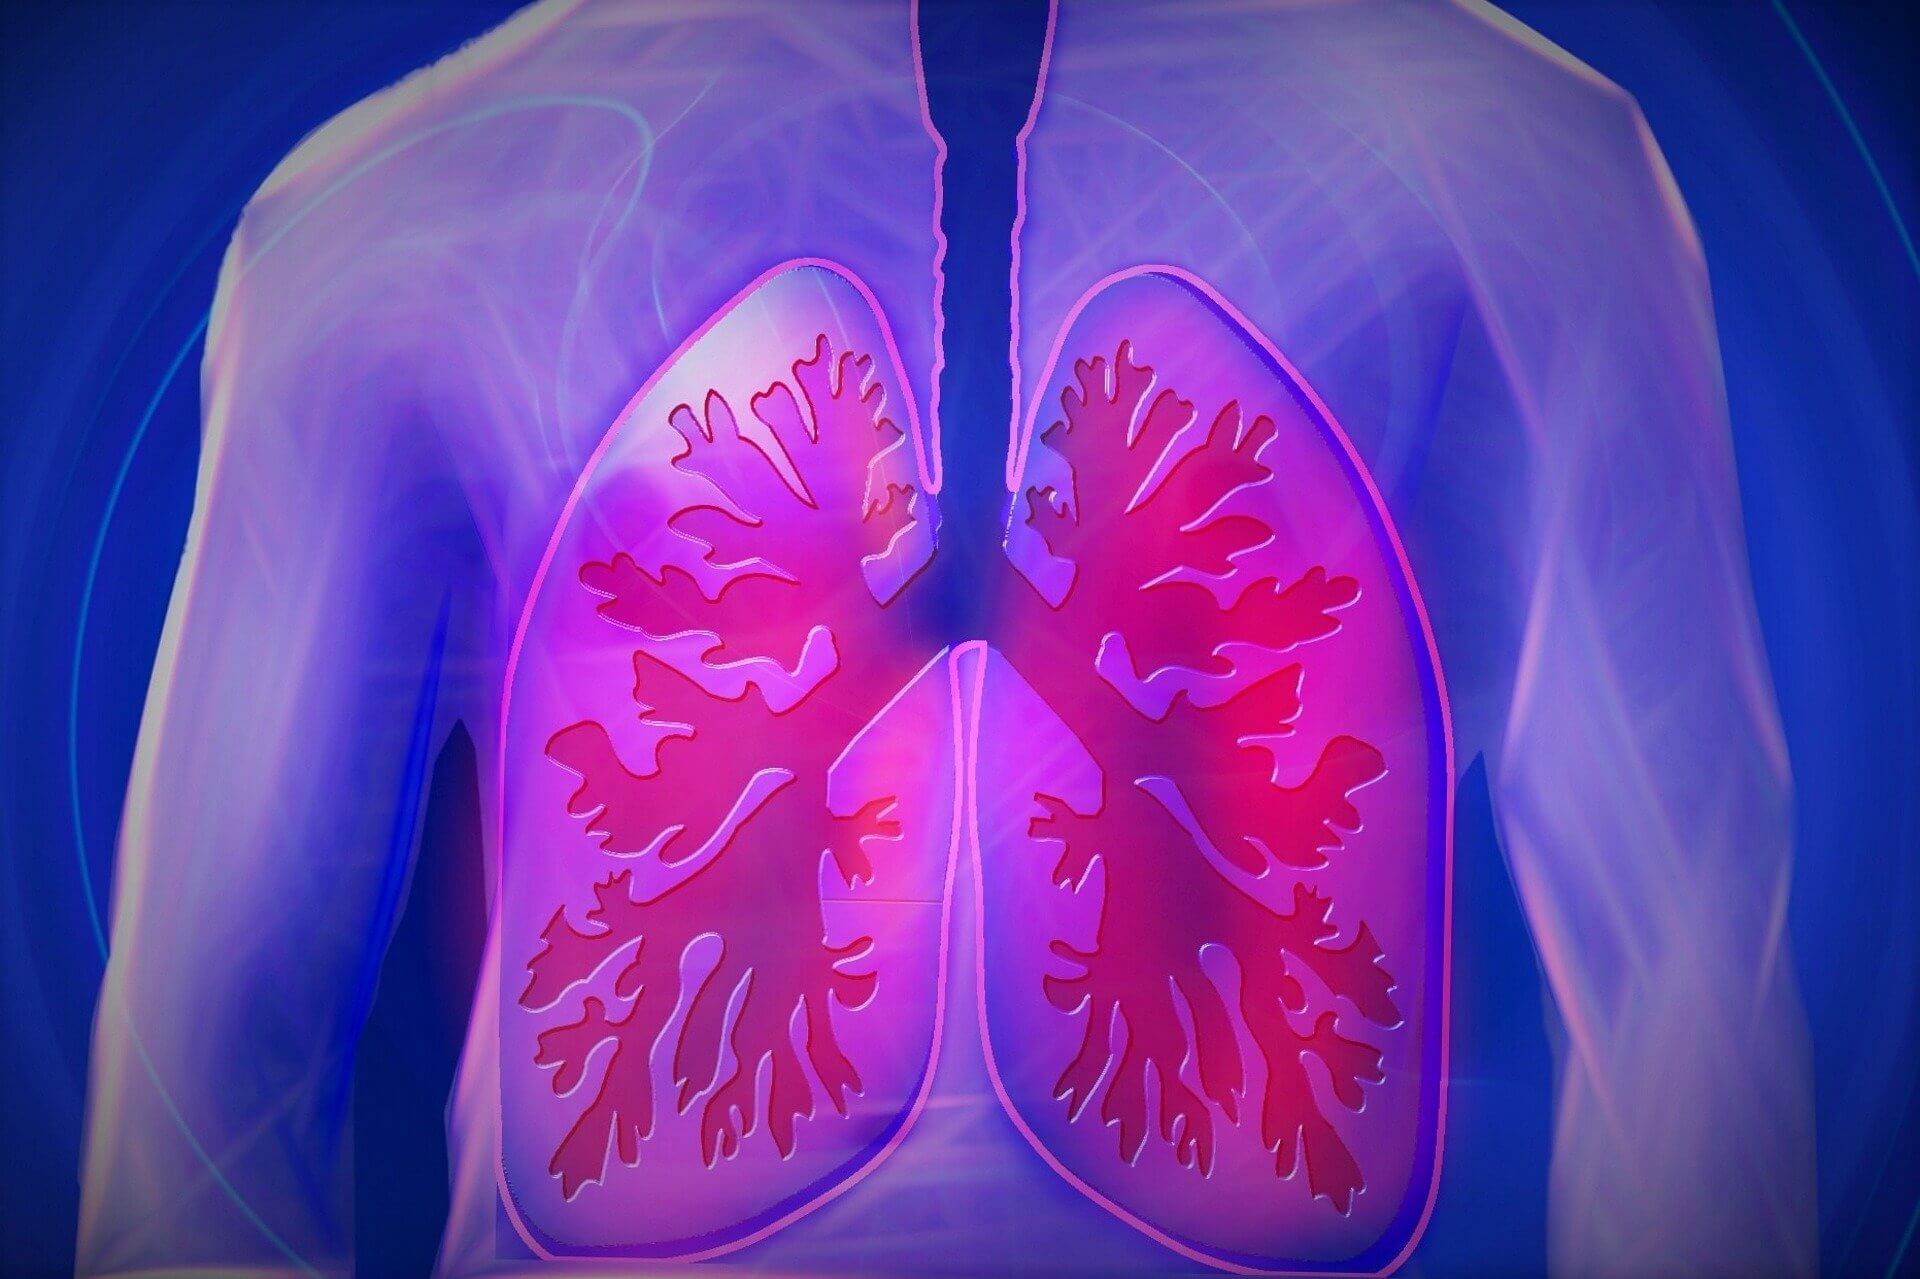 New blood test detects lung cancer with high accuracy